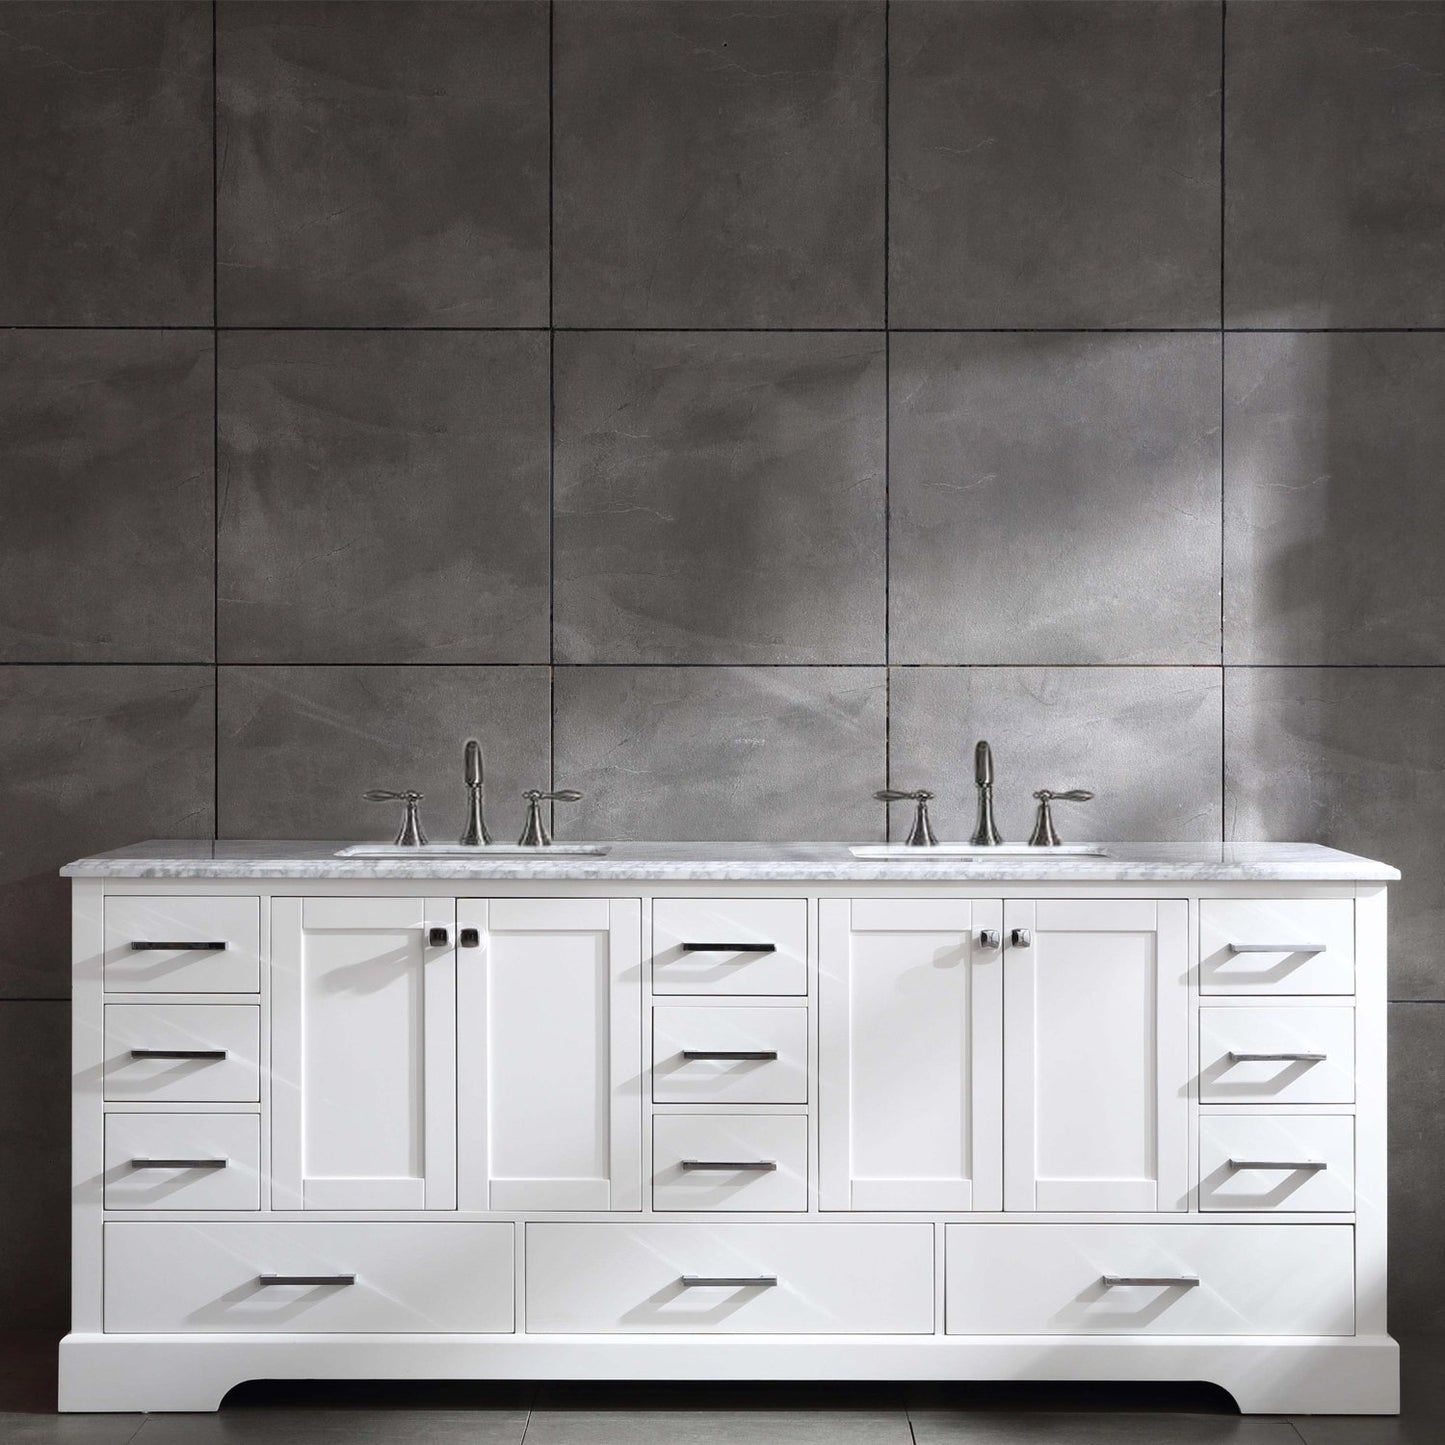 Eviva Storehouse 84 Inch Bathroom Vanity with Laxurious White Carrera Counter-top - Luxe Bathroom Vanities Luxury Bathroom Fixtures Bathroom Furniture